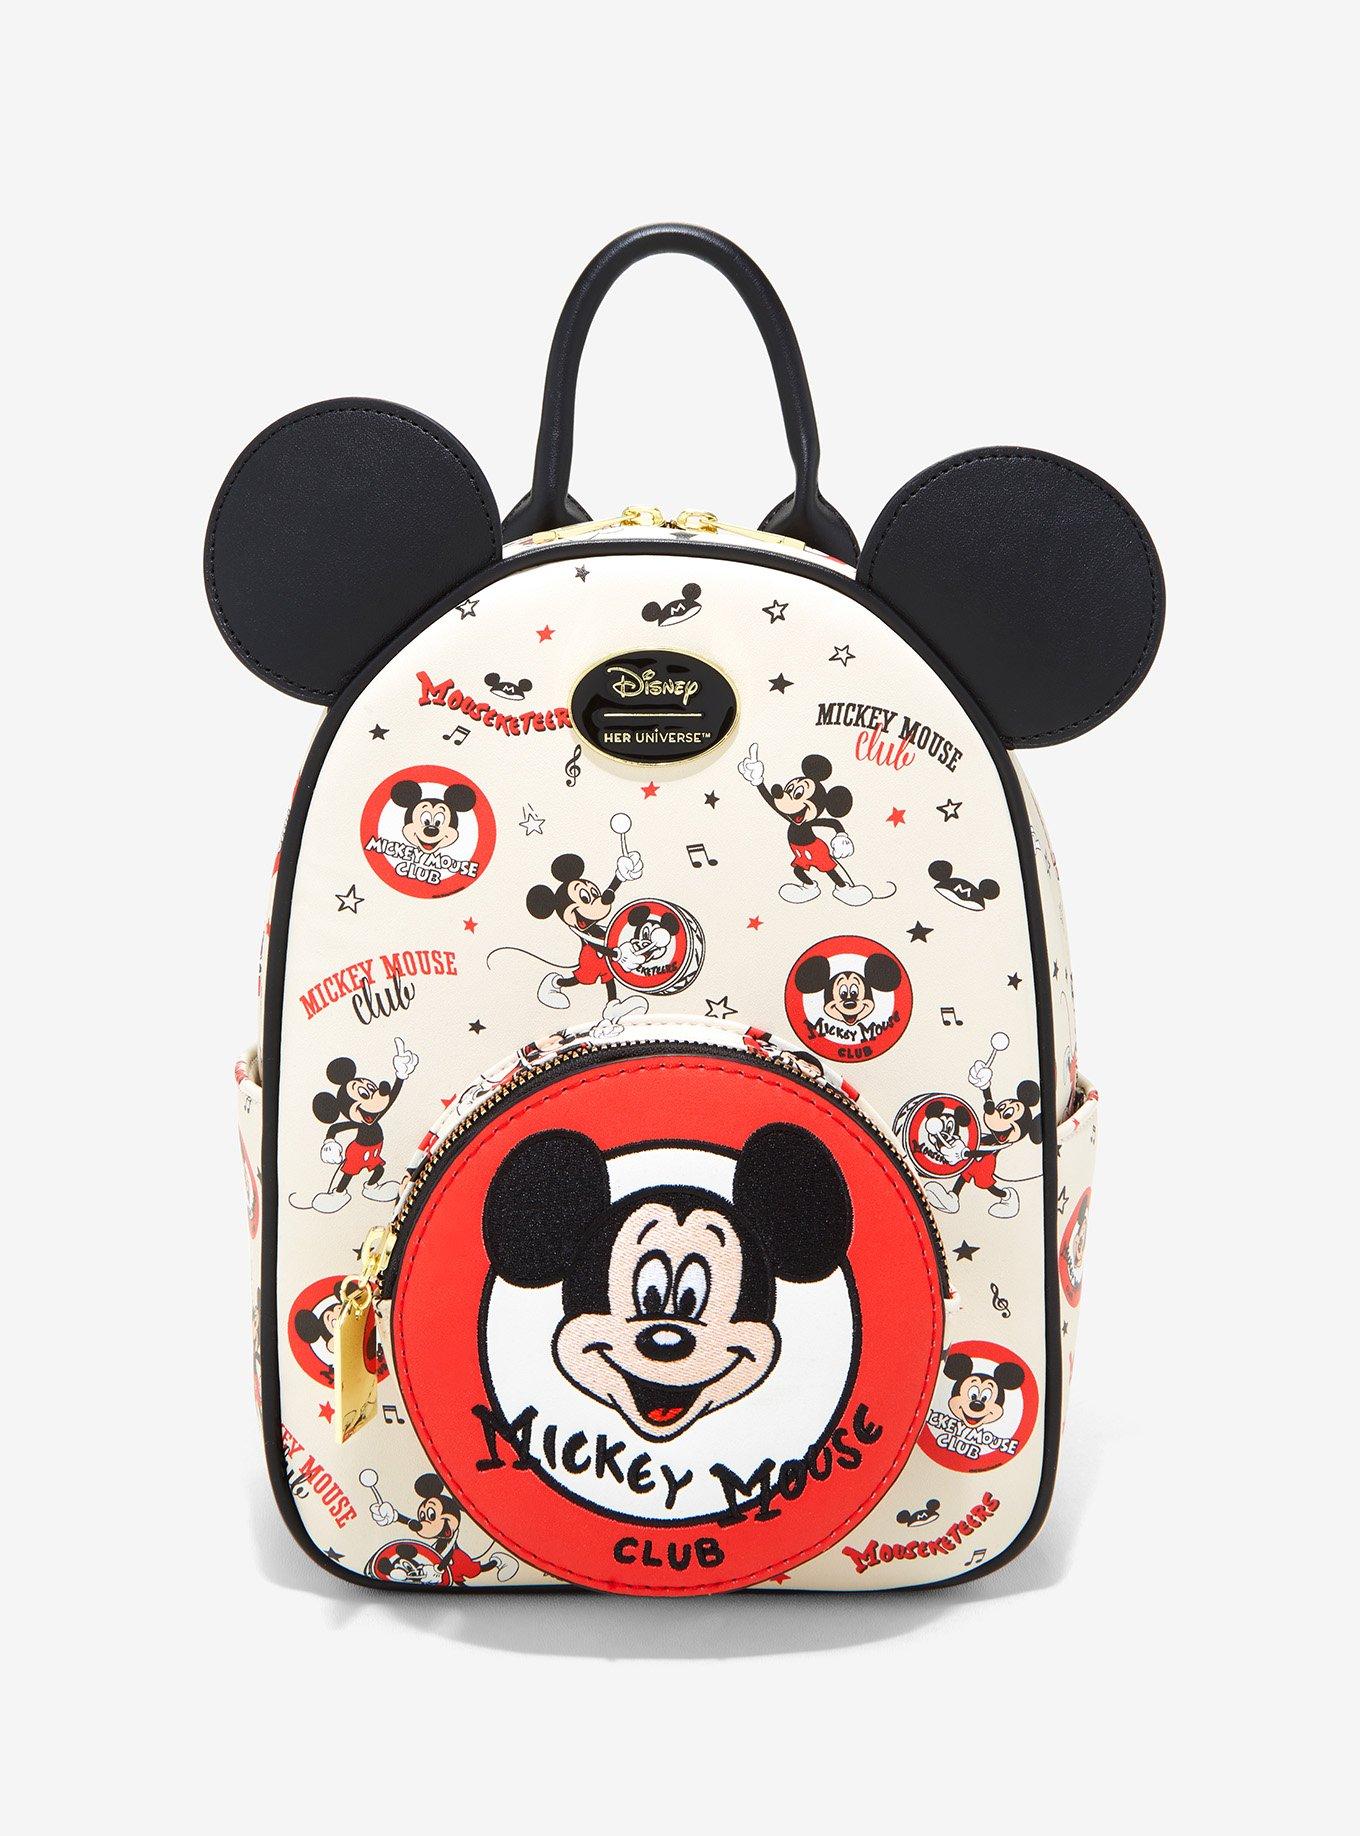 Women's Bag Mickey Mouse Cartoon Pictures Shoulder Bags Cute Girl Messenger  Bag Coin Purse Fashion Anime Women Bags Gifts